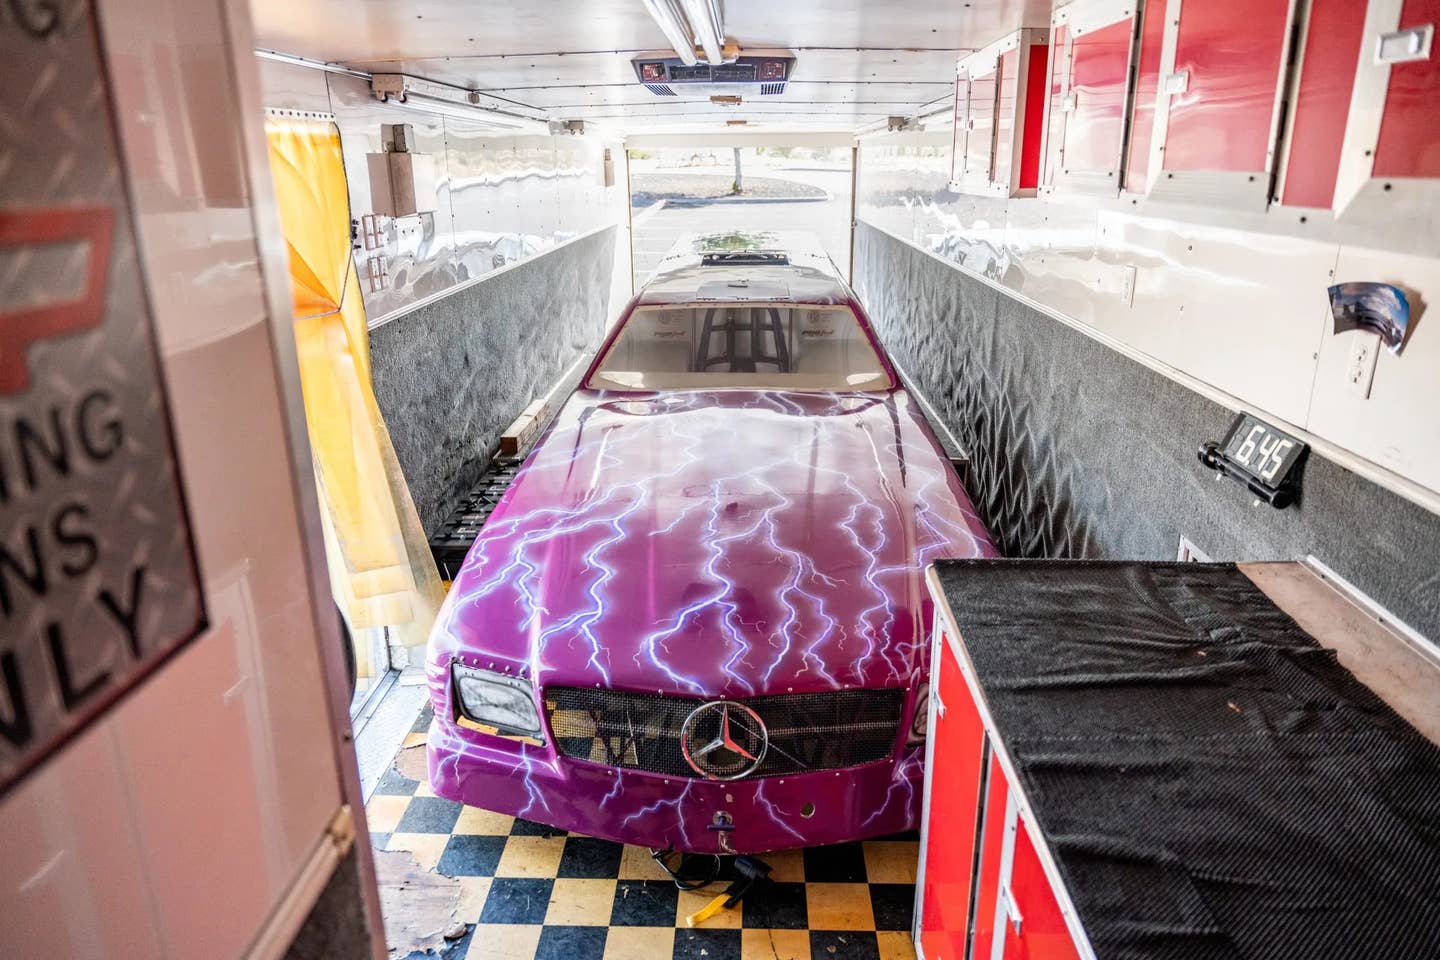 Mercedes S-Class jet-powered limo